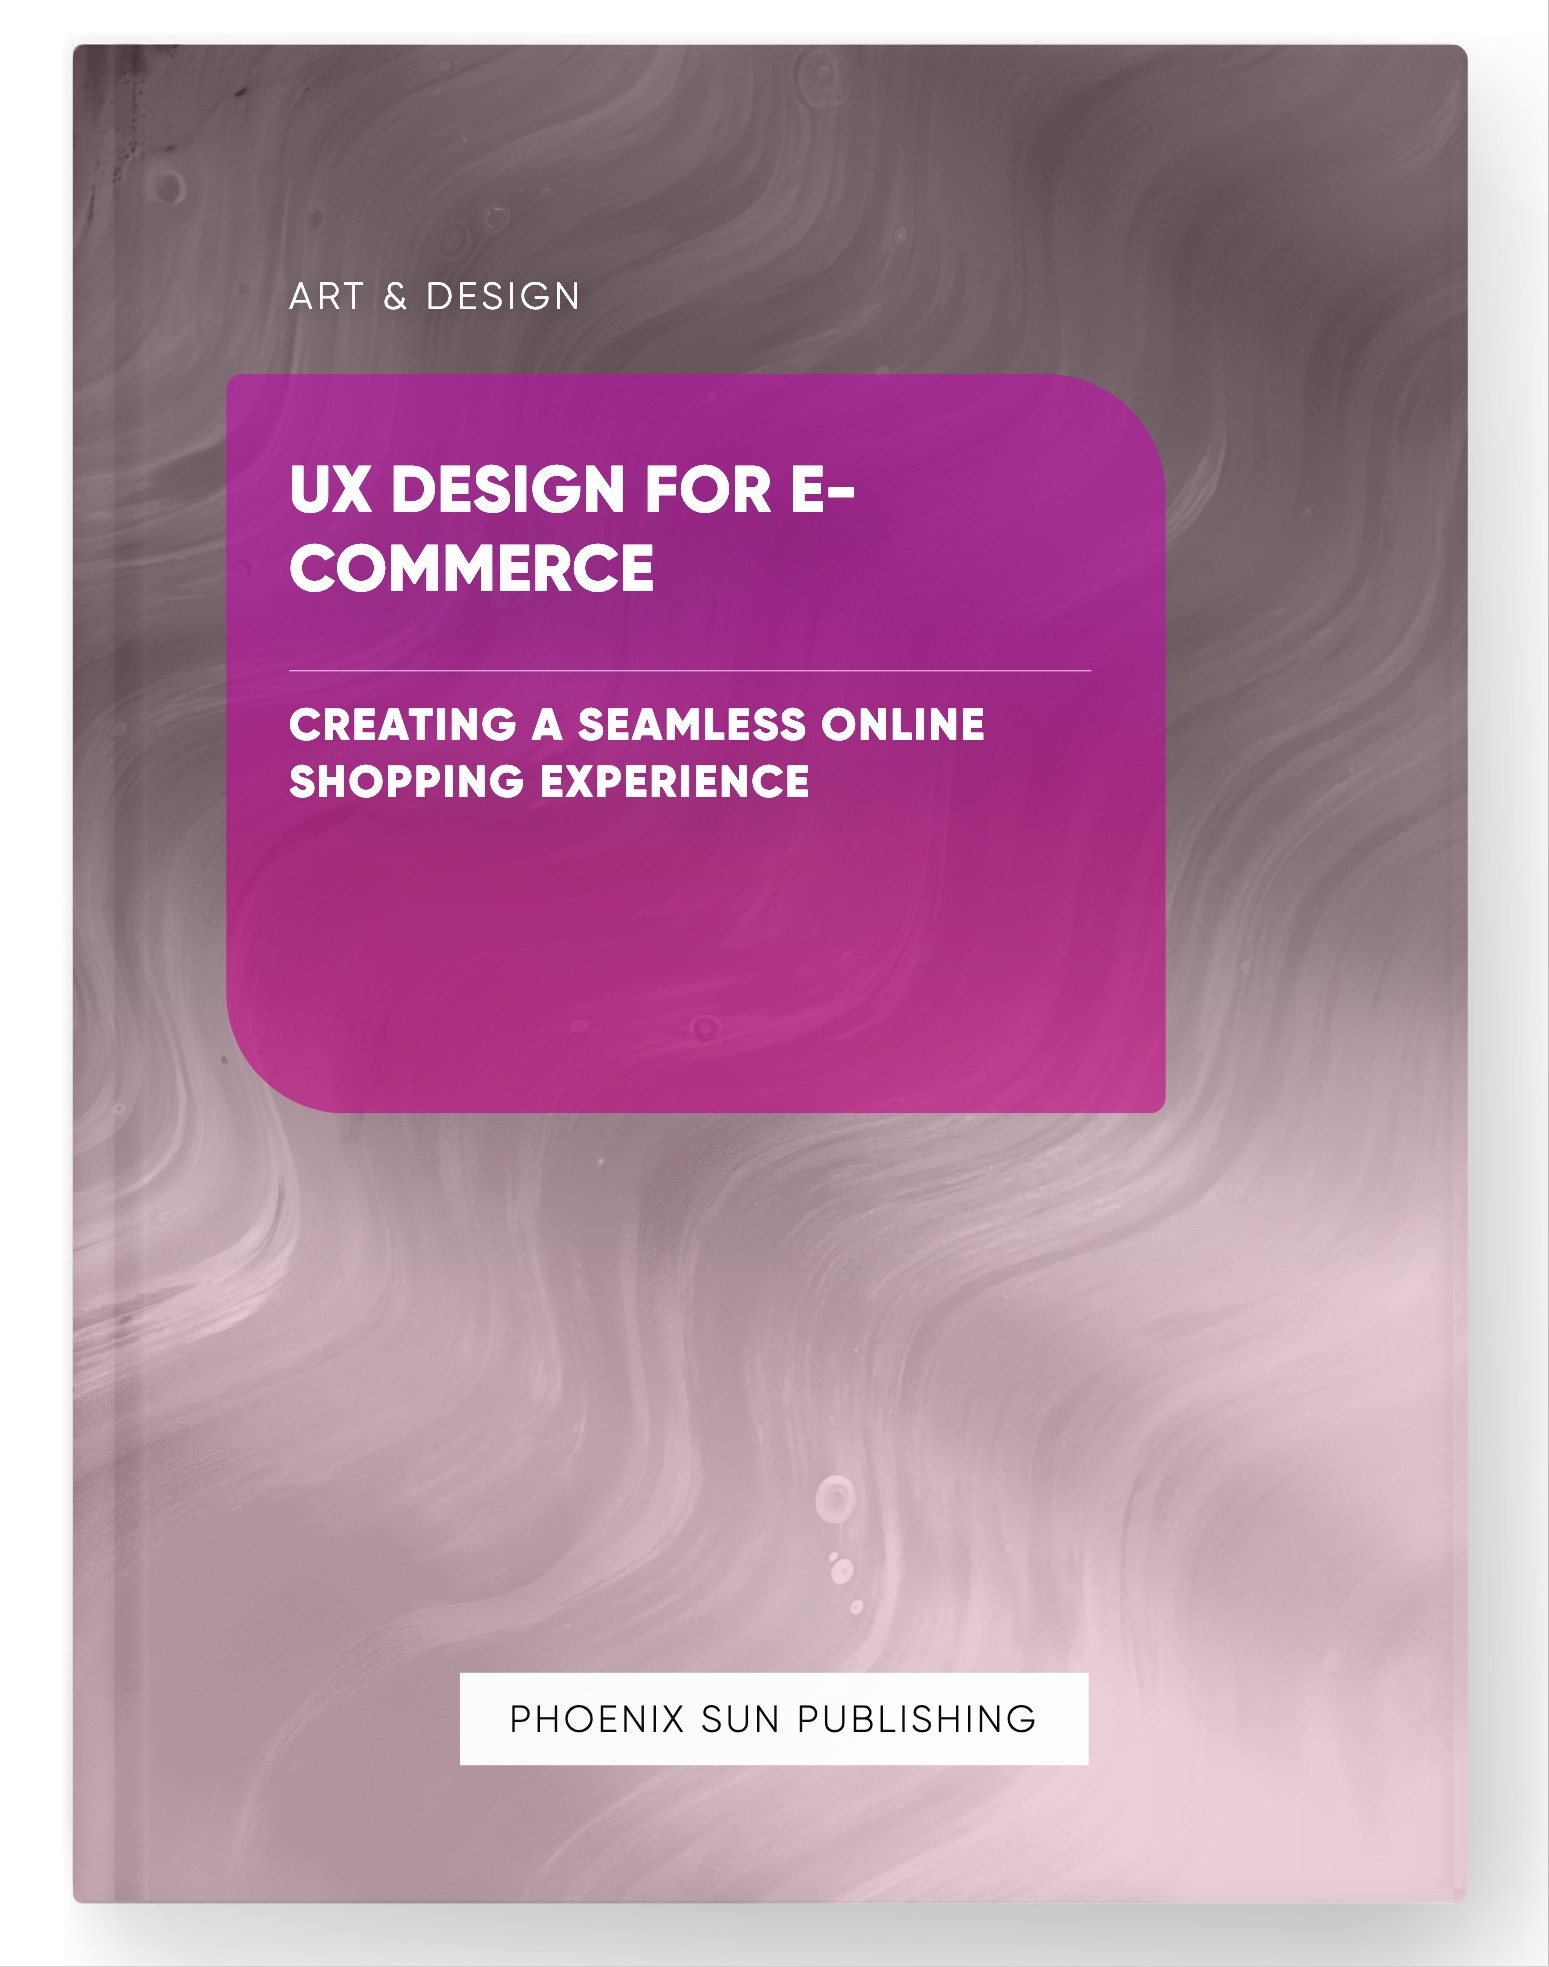 UX Design for E-commerce – Creating a Seamless Online Shopping Experience